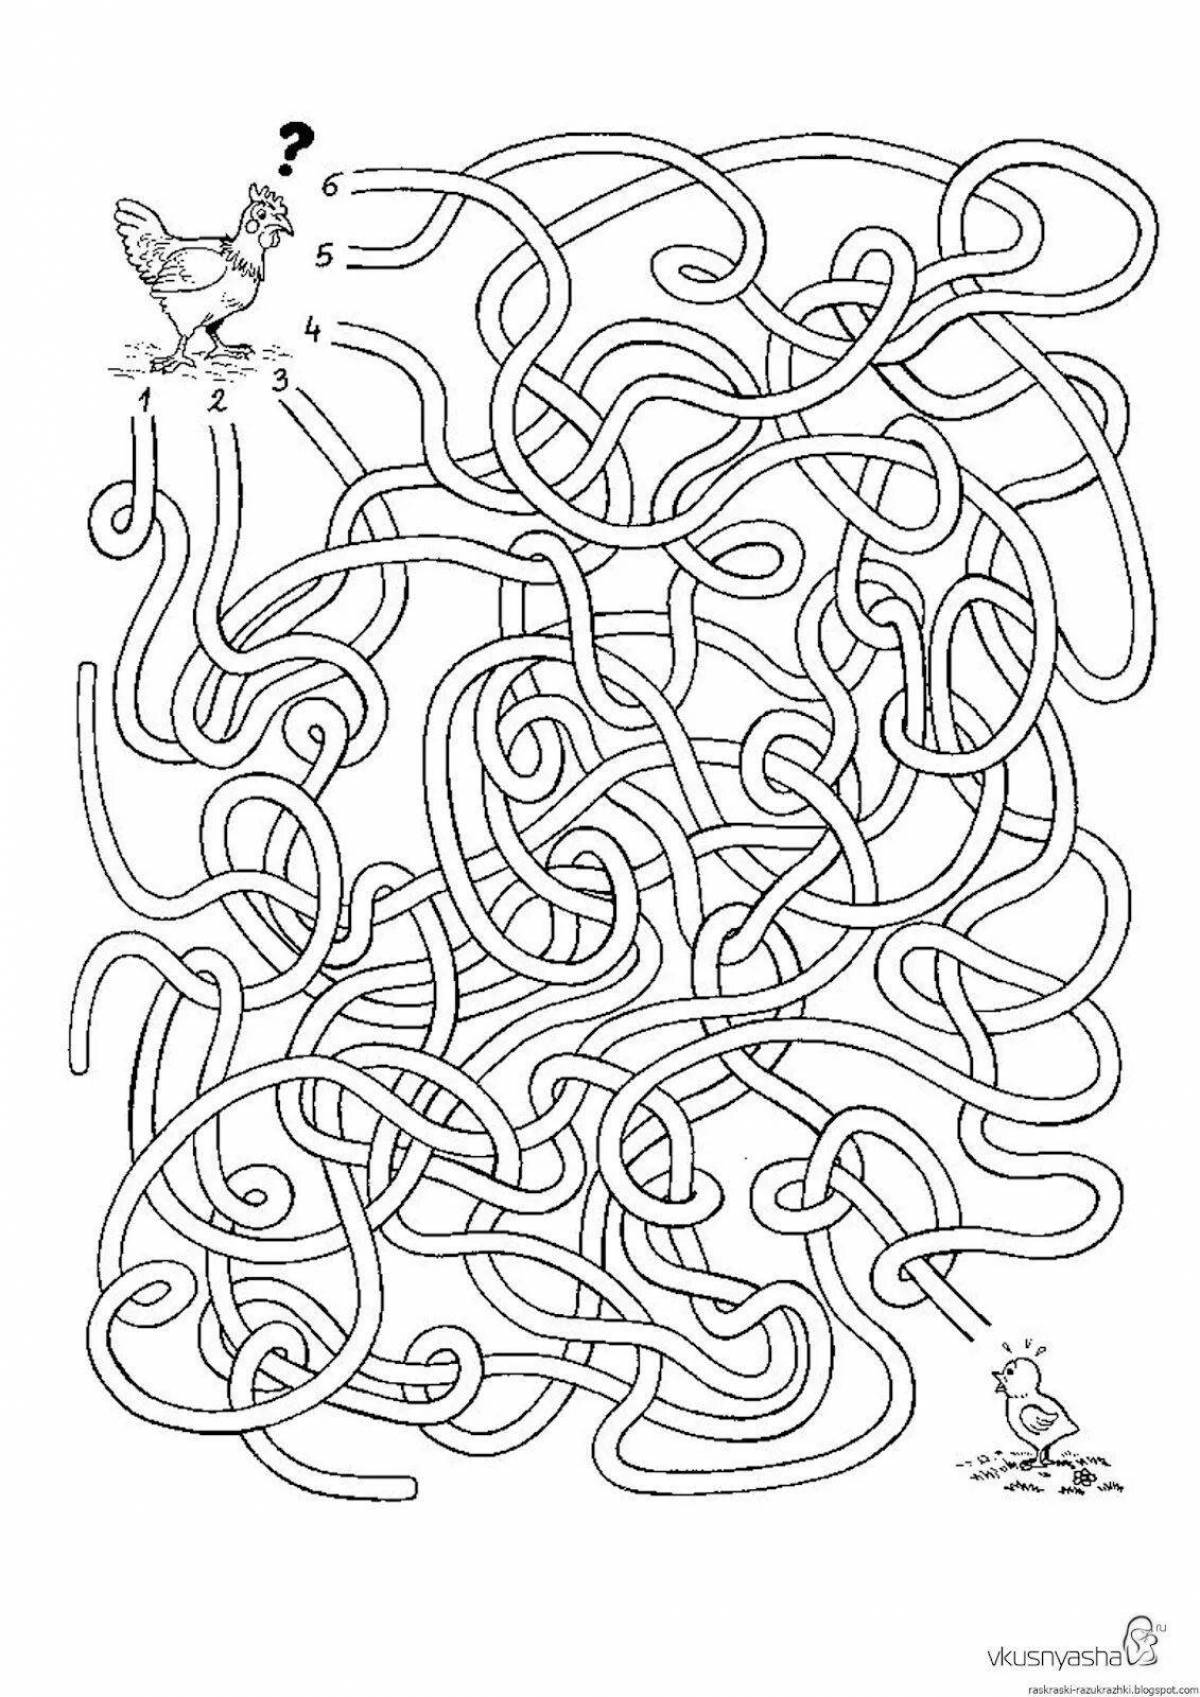 Mazes for children 6 7 years old #14